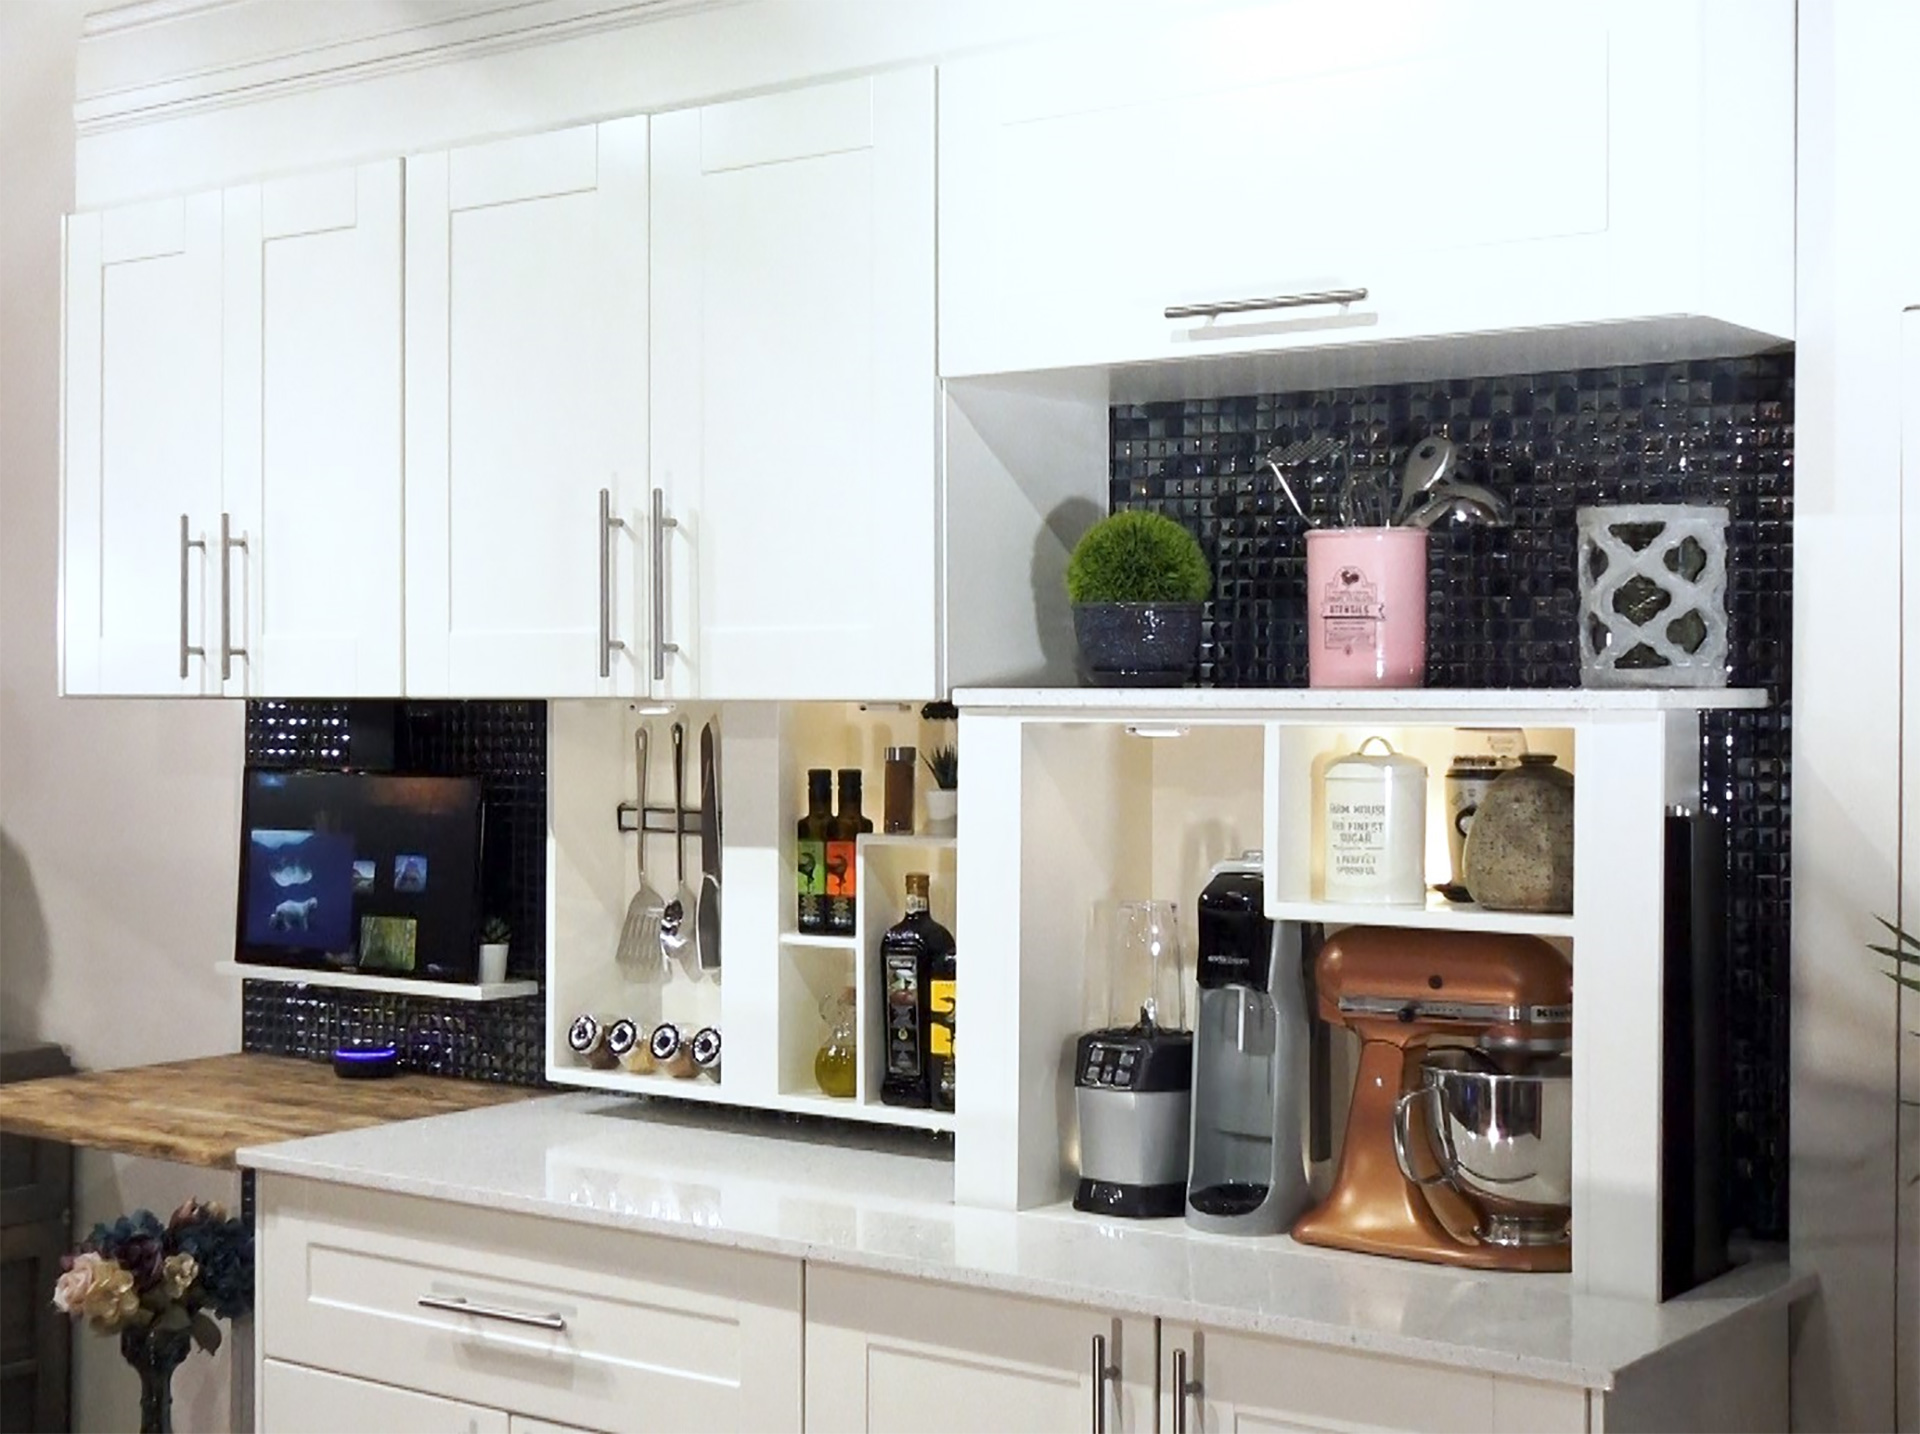 How Pop-Up Storage Lifts Can Transform Any Kitchen 